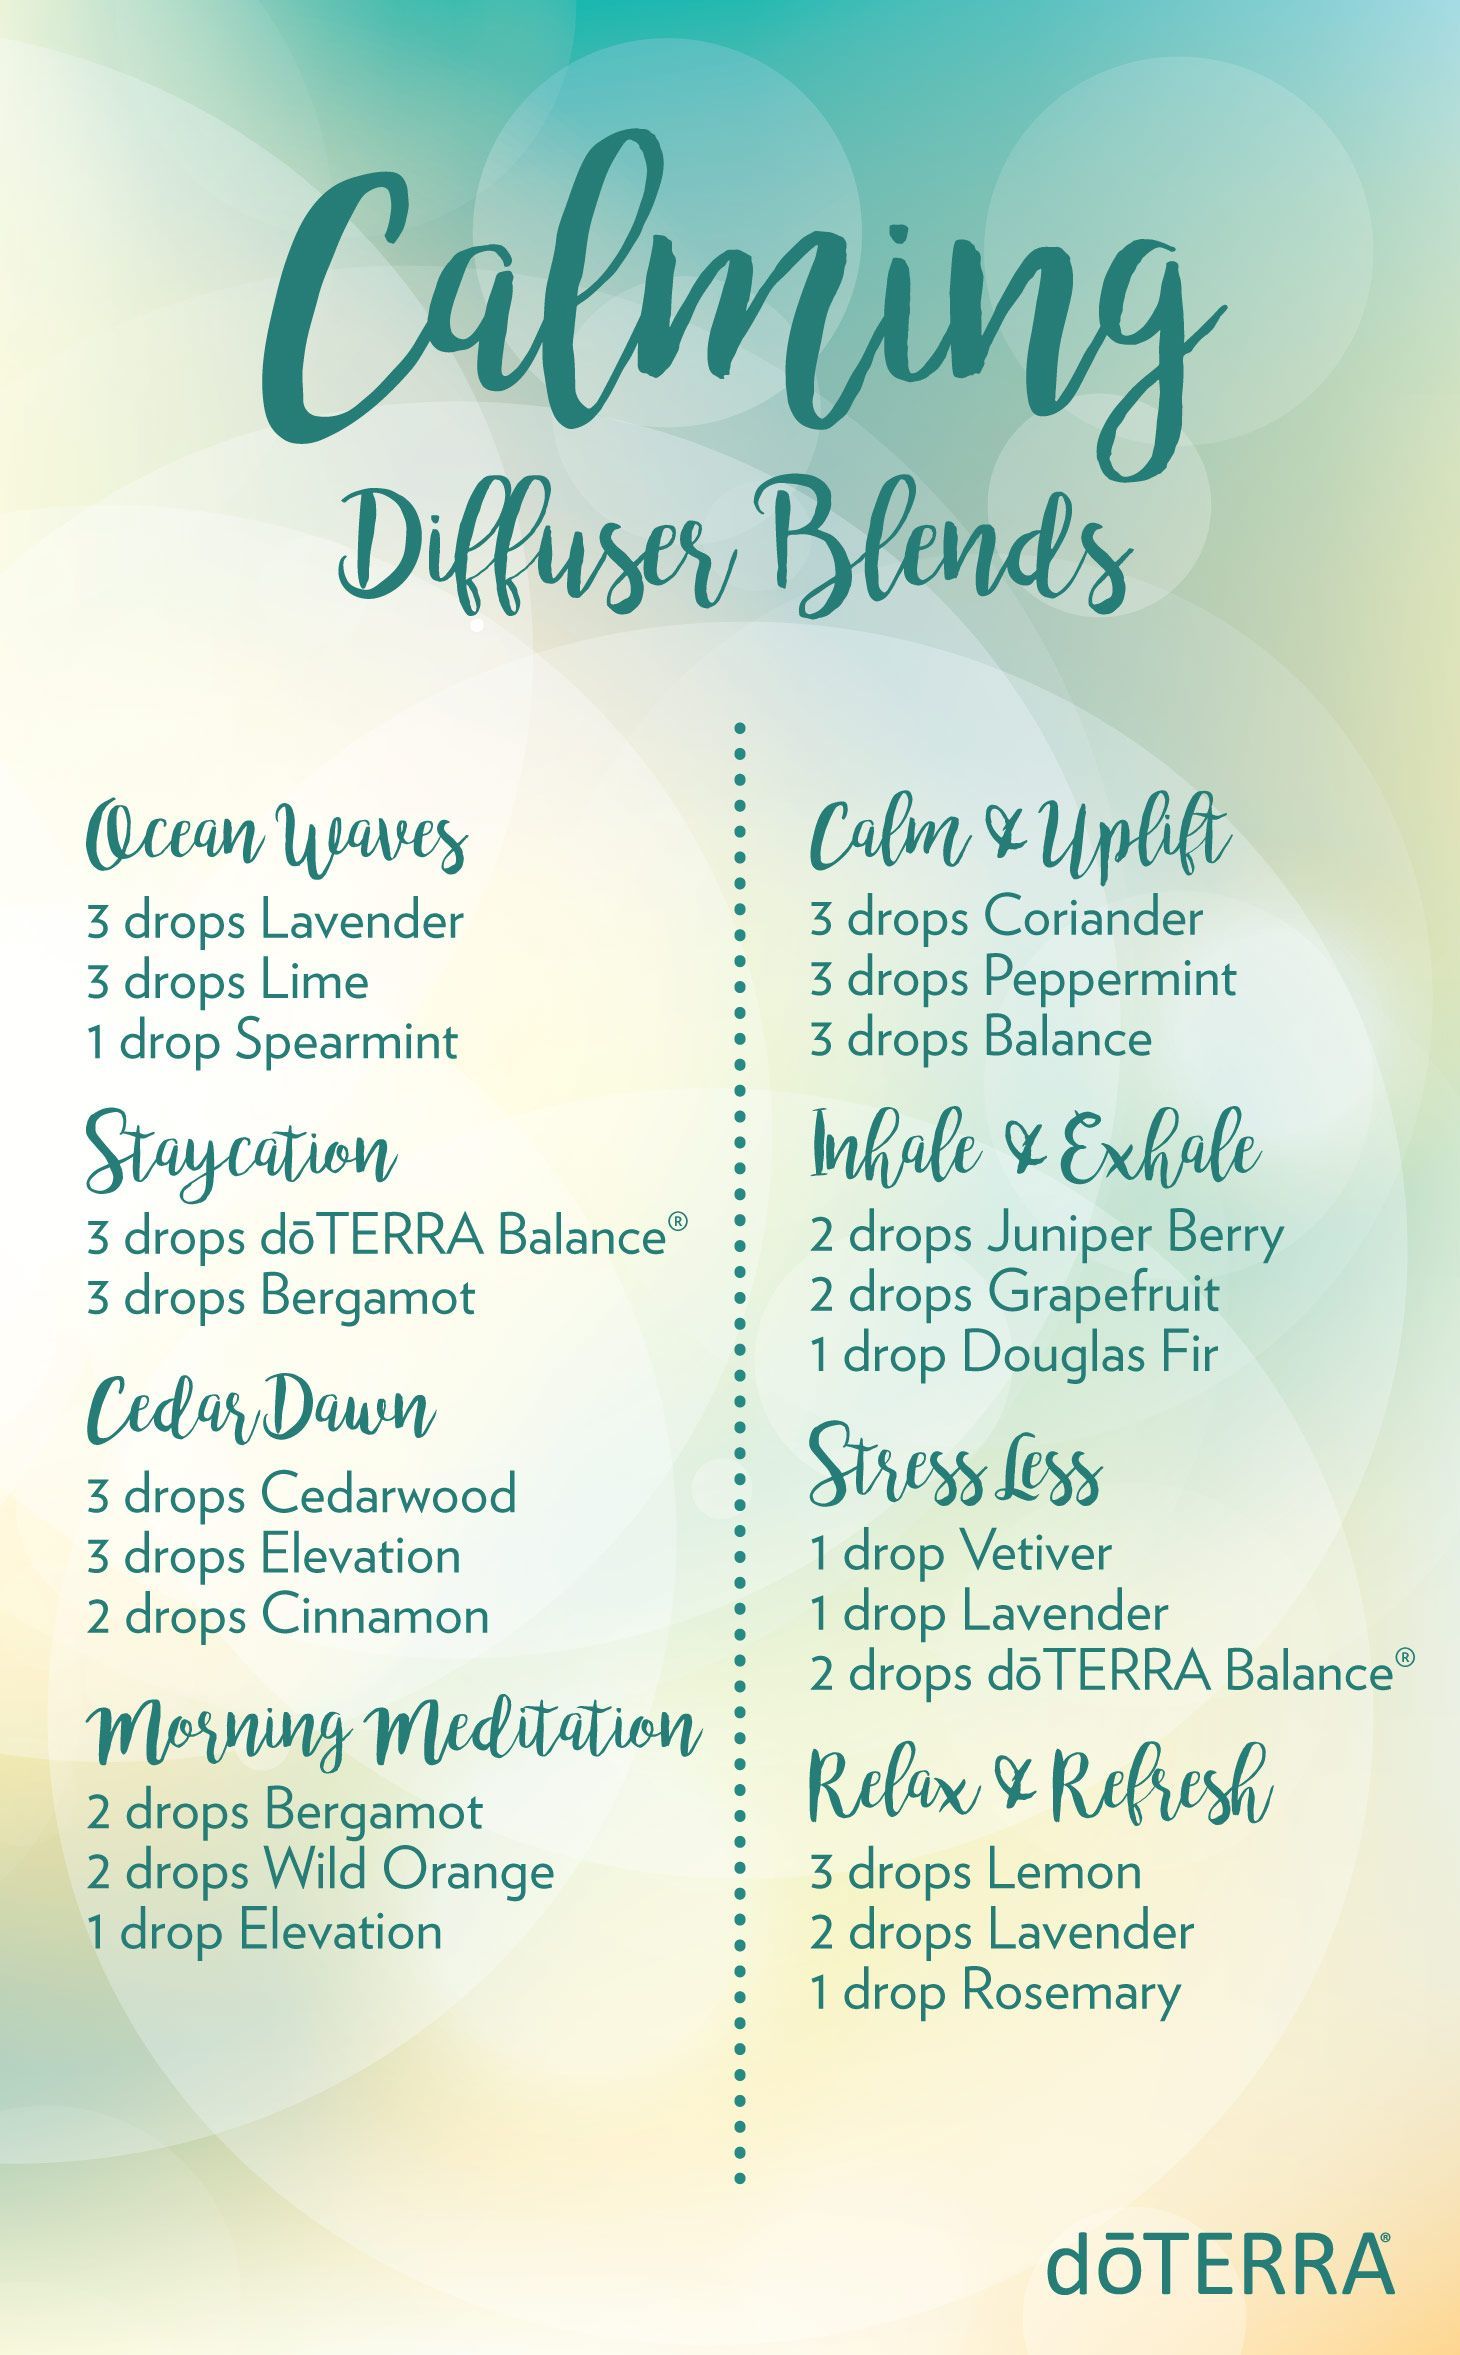 Diffuse these essential oil blends and experience the calming benefits they offer!